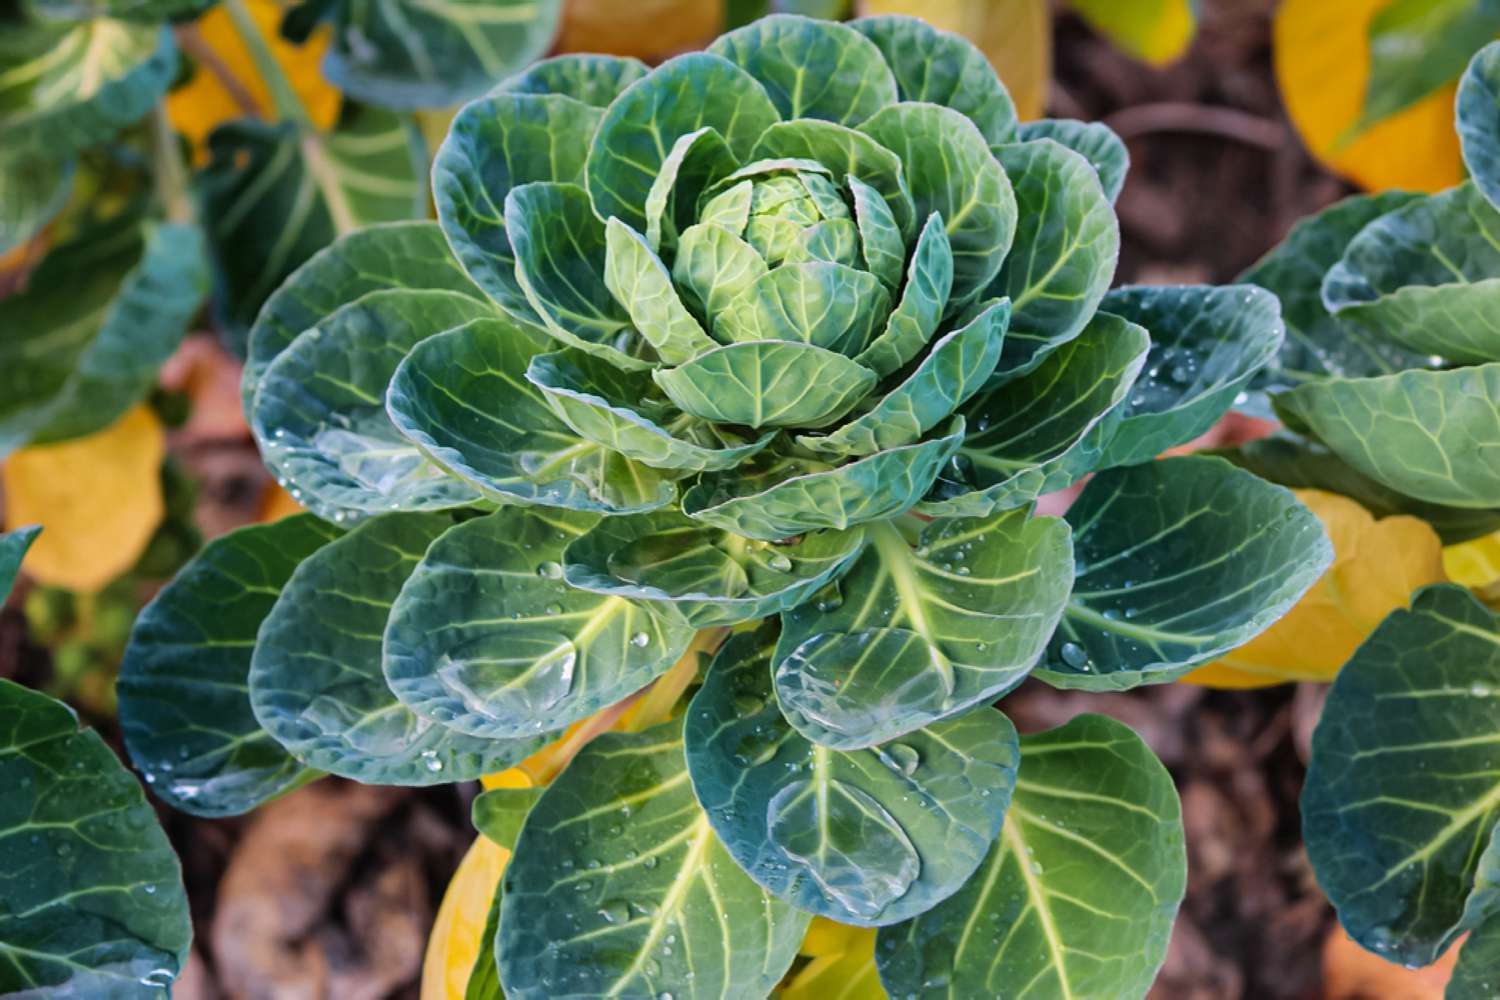 How to Care for Brussel Sprout Plants